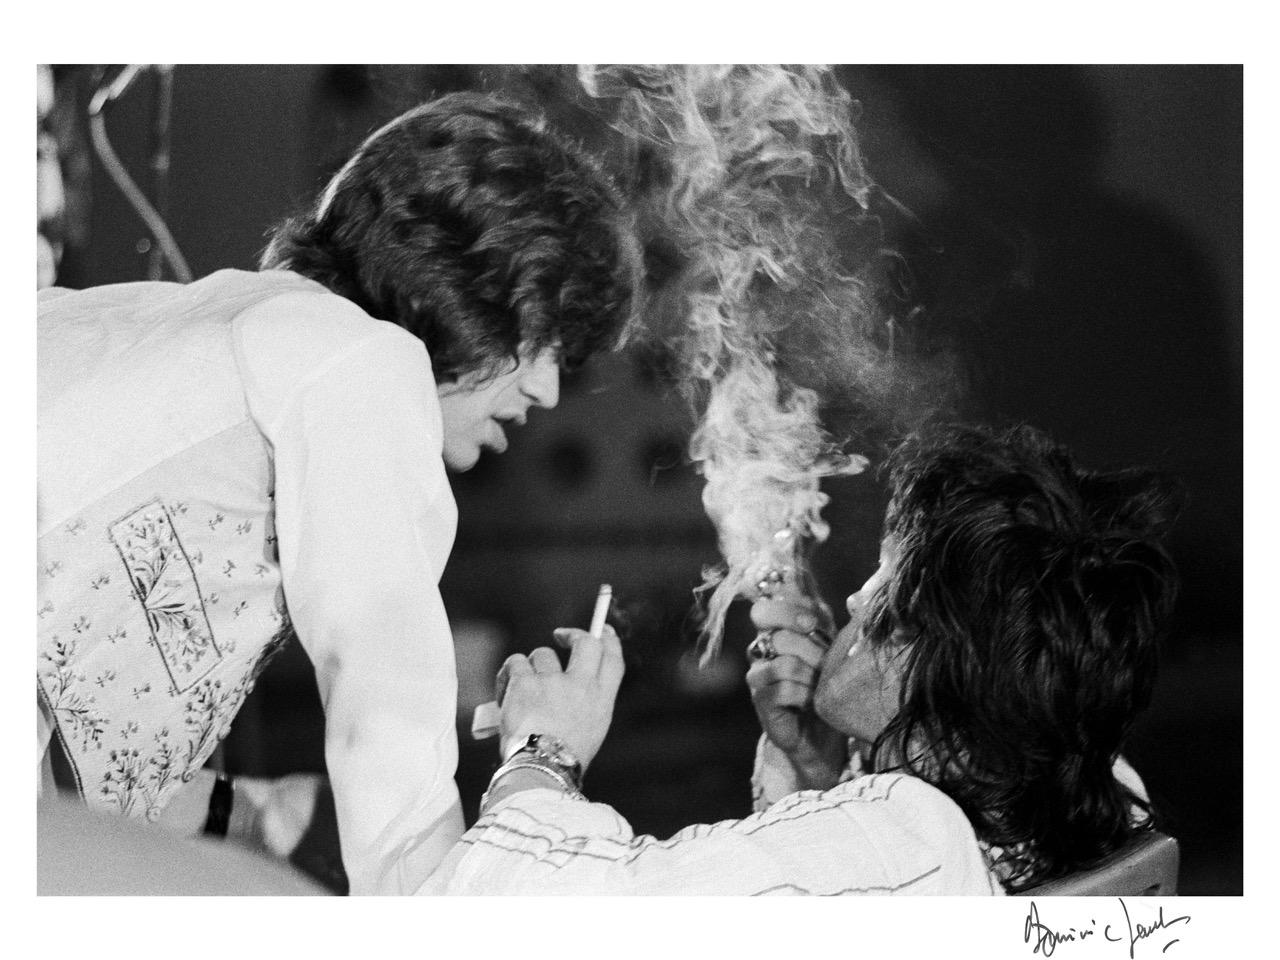 Dominic Lamblin Black and White Photograph - Getting high! Mick Jagger and Keith Richards 1976 Photography black & white 7/50